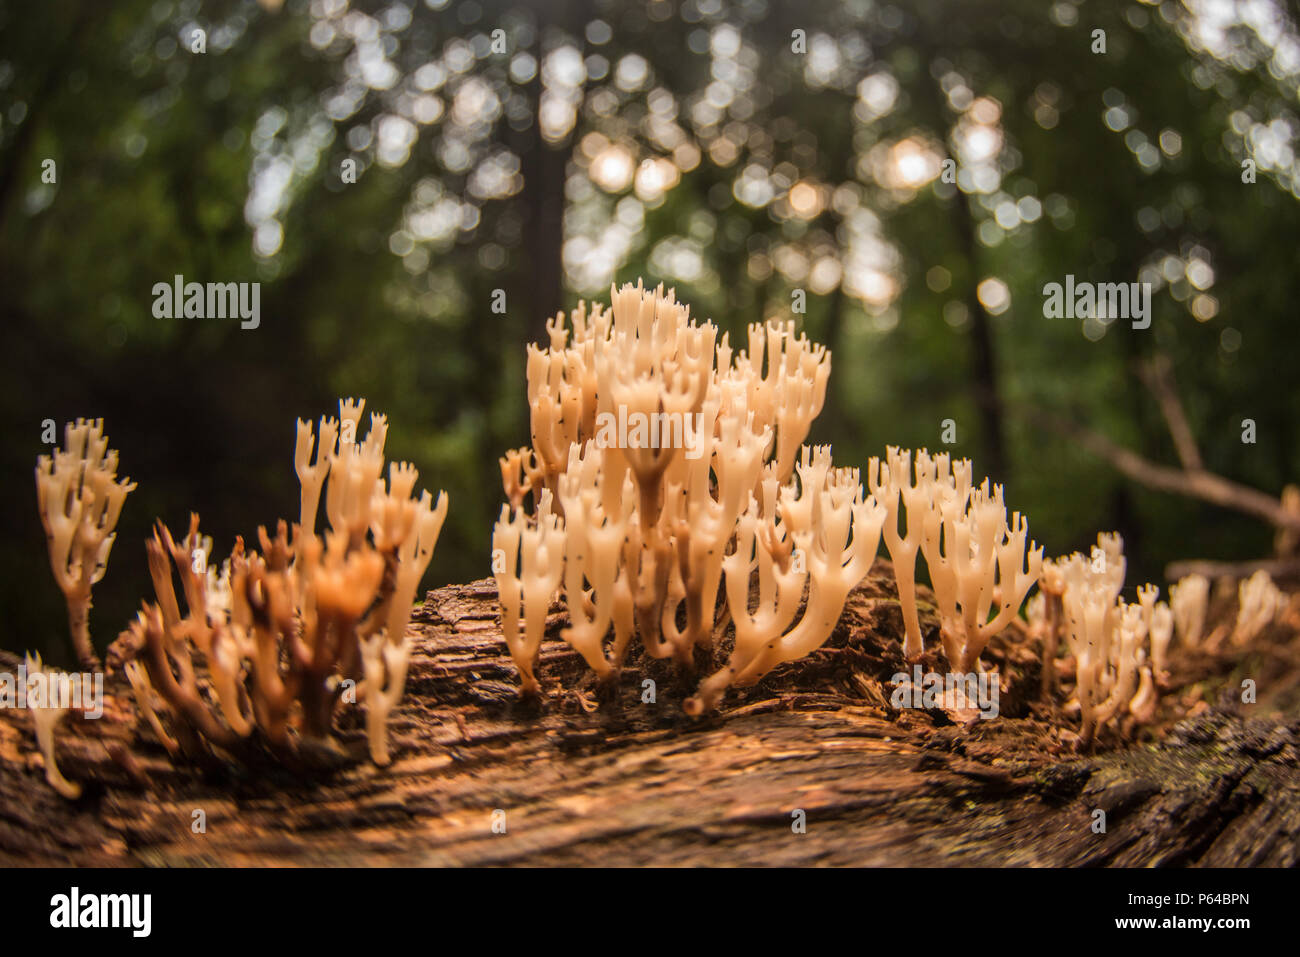 Coral fungi growing on a rotting log in eastern North Carolina, this type of fungus is considered a clavarioid fungi. Stock Photo